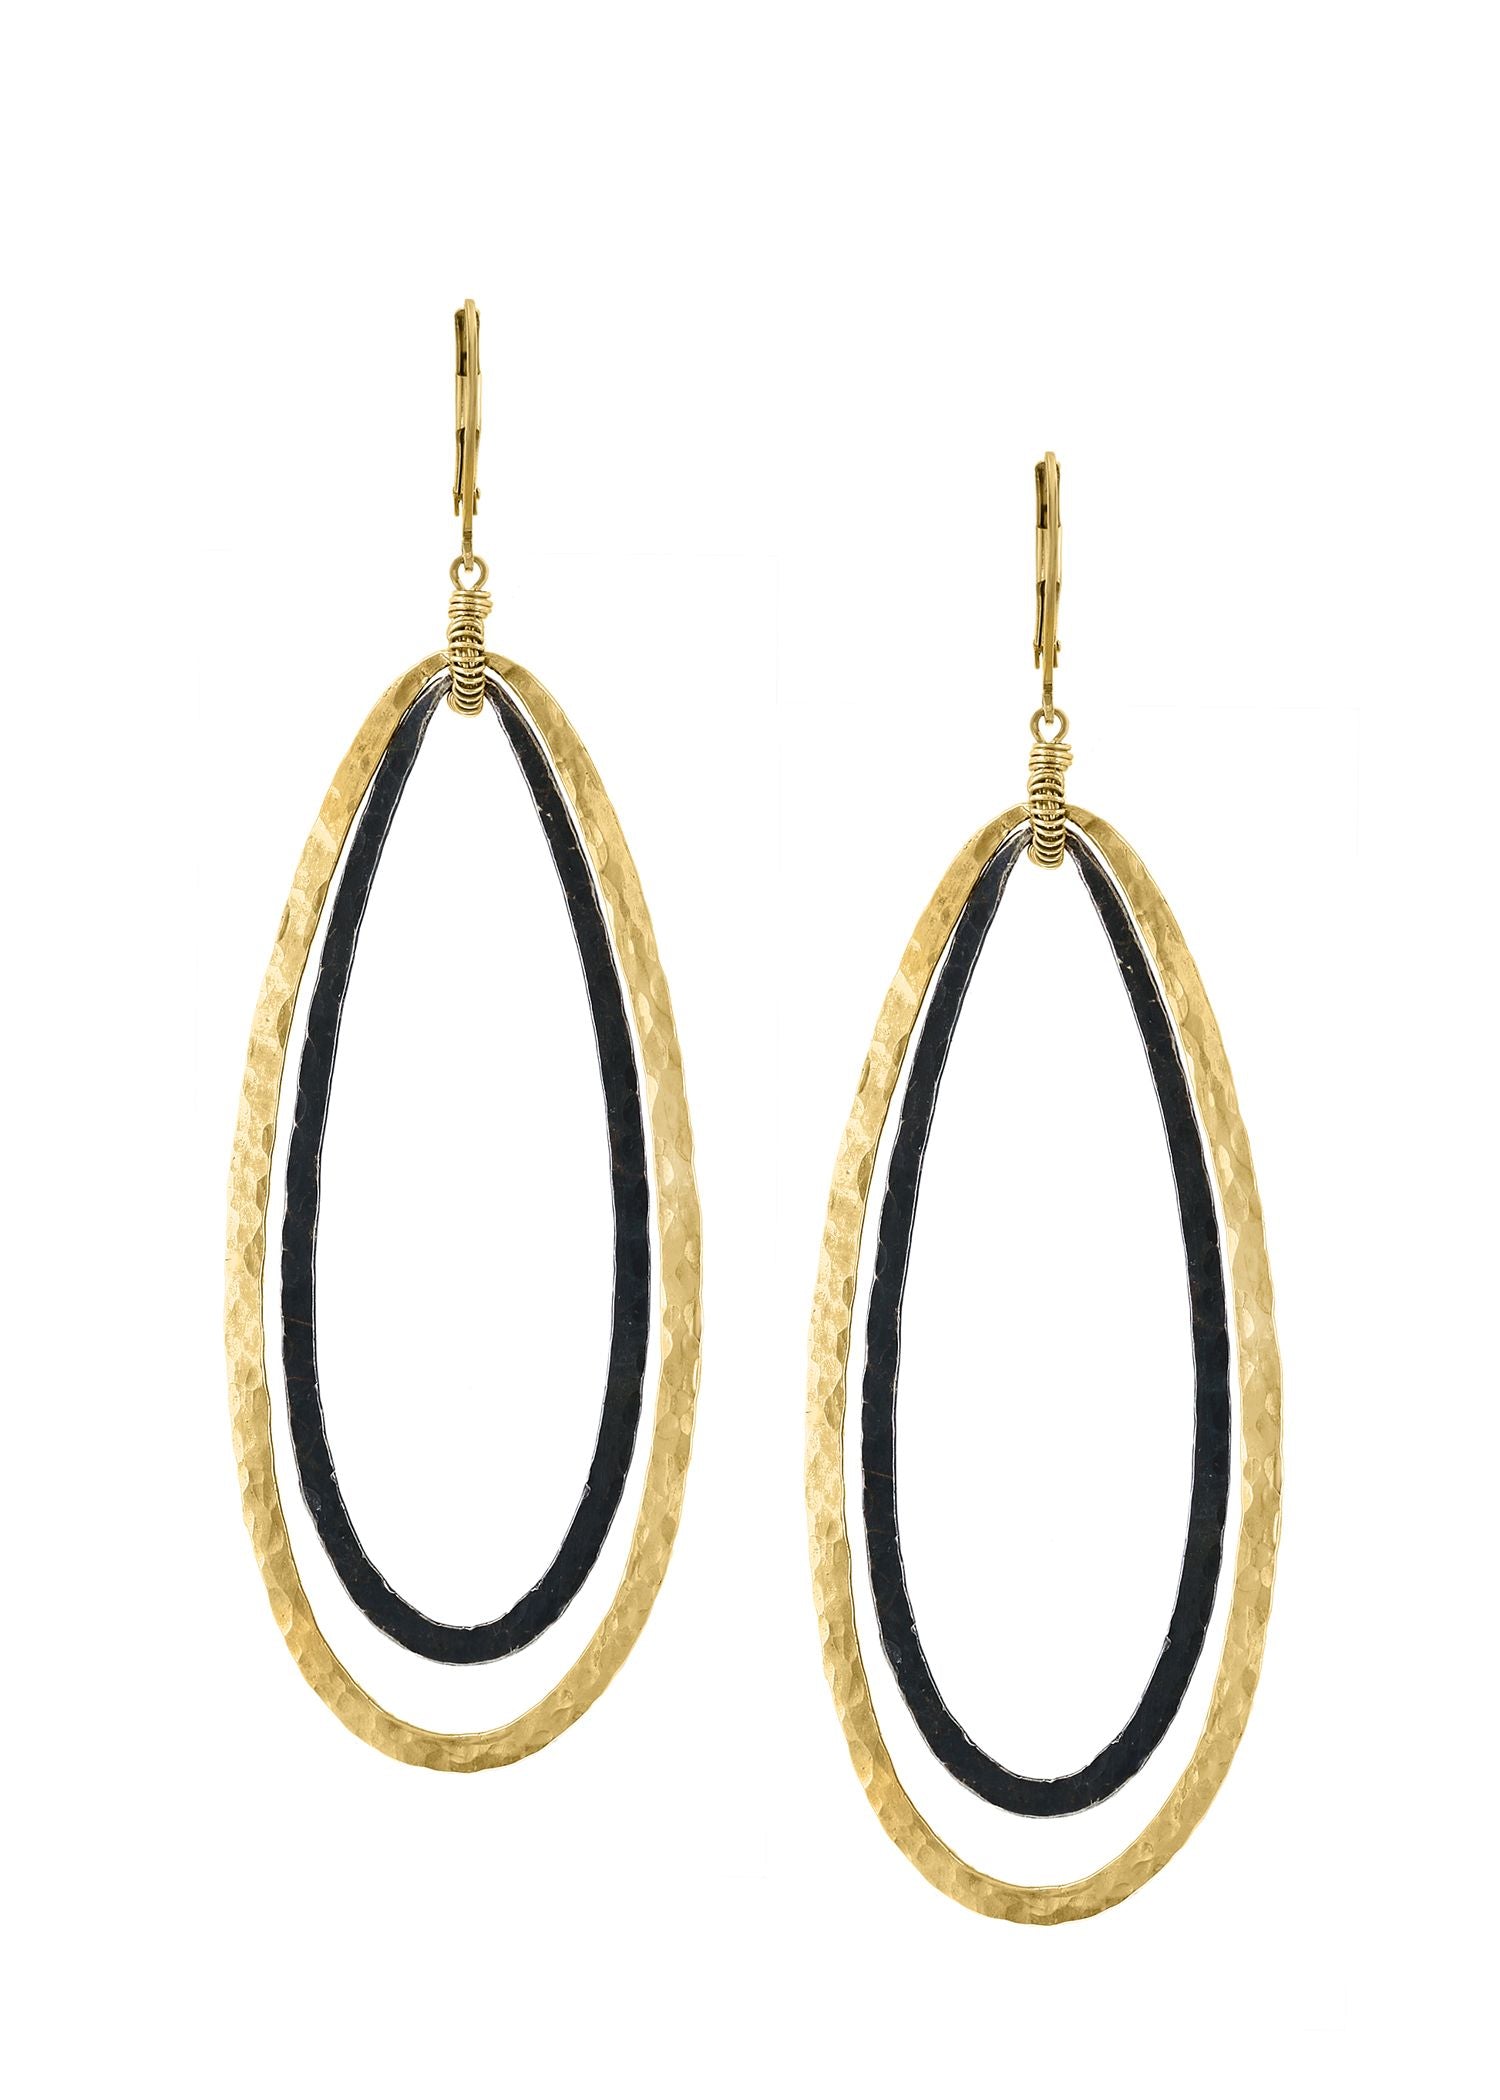 14k gold fill Blackened sterling silver Mixed metal Earrings measure 2-13/16" in length (including the levers) and 7/8" in width Handmade in our Los Angeles studio